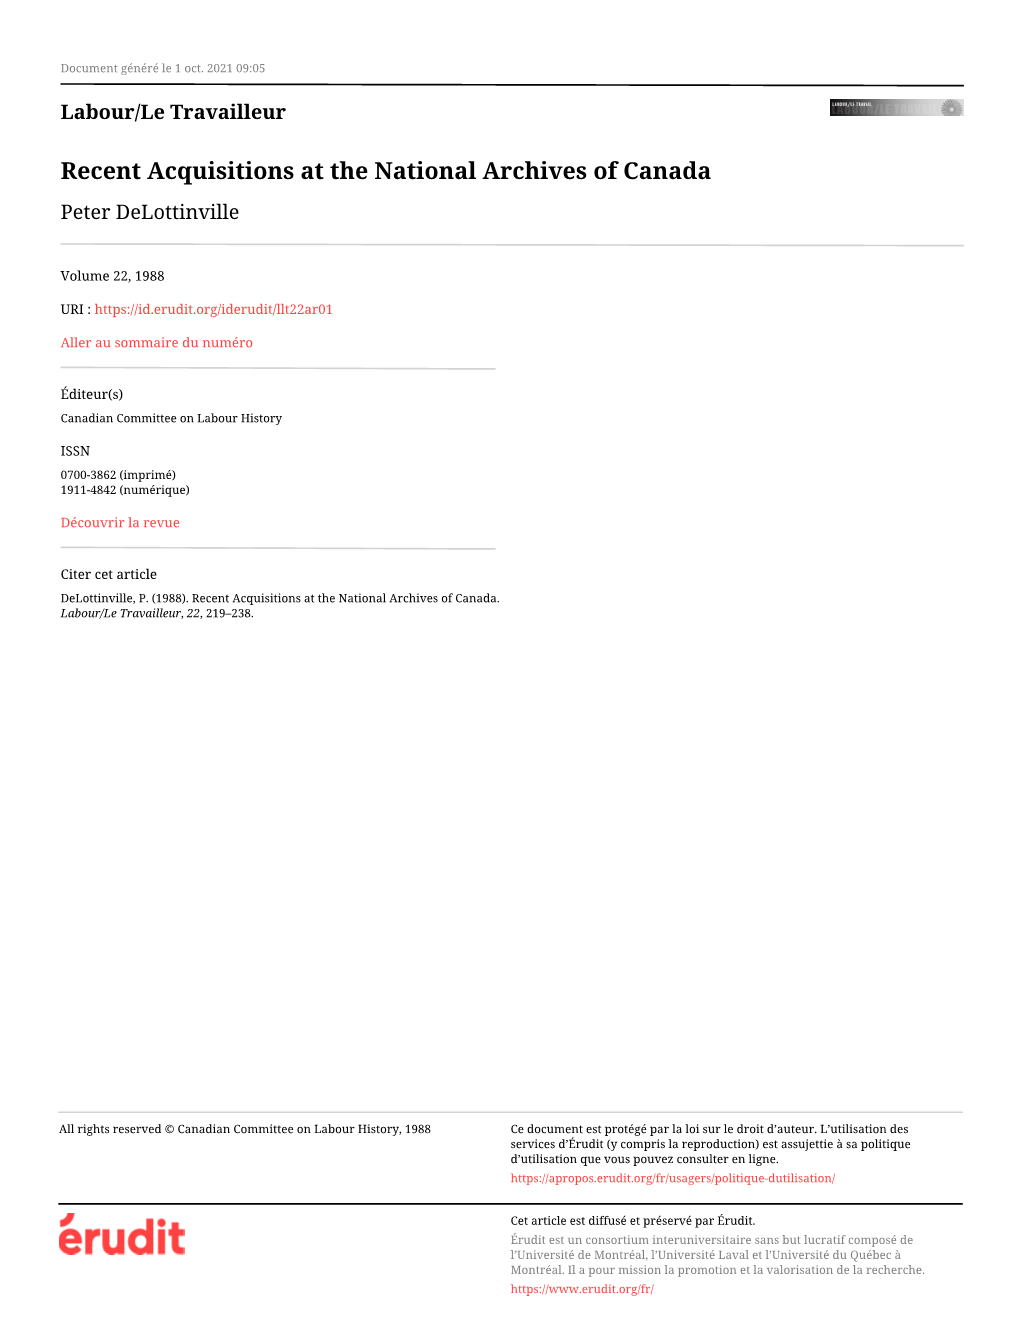 Recent Acquisitions at the National Archives of Canada Peter Delottinville